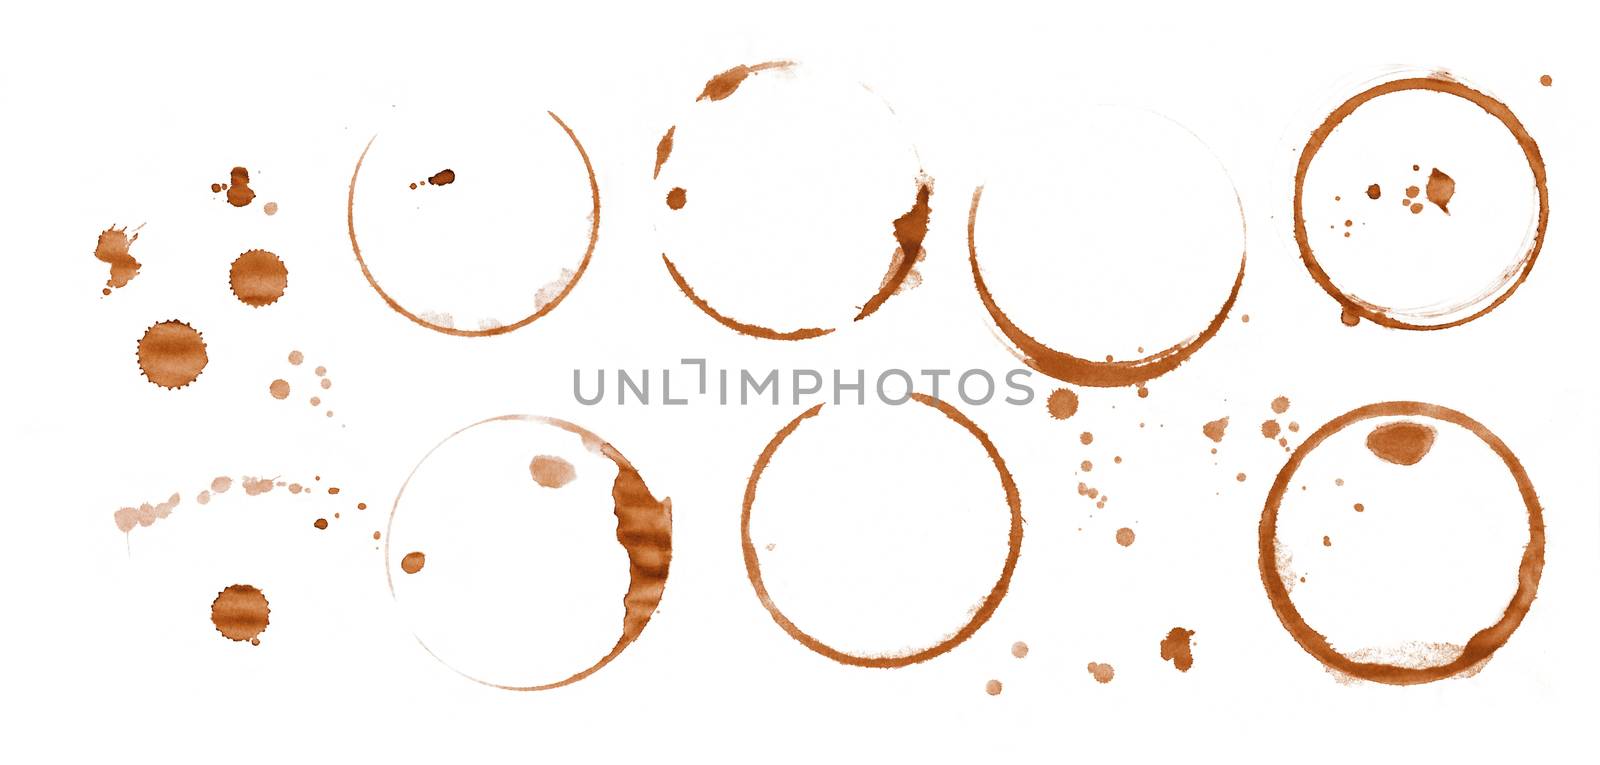 Dry brown coffee cup or mug ring stains and blob drops isolated on white background